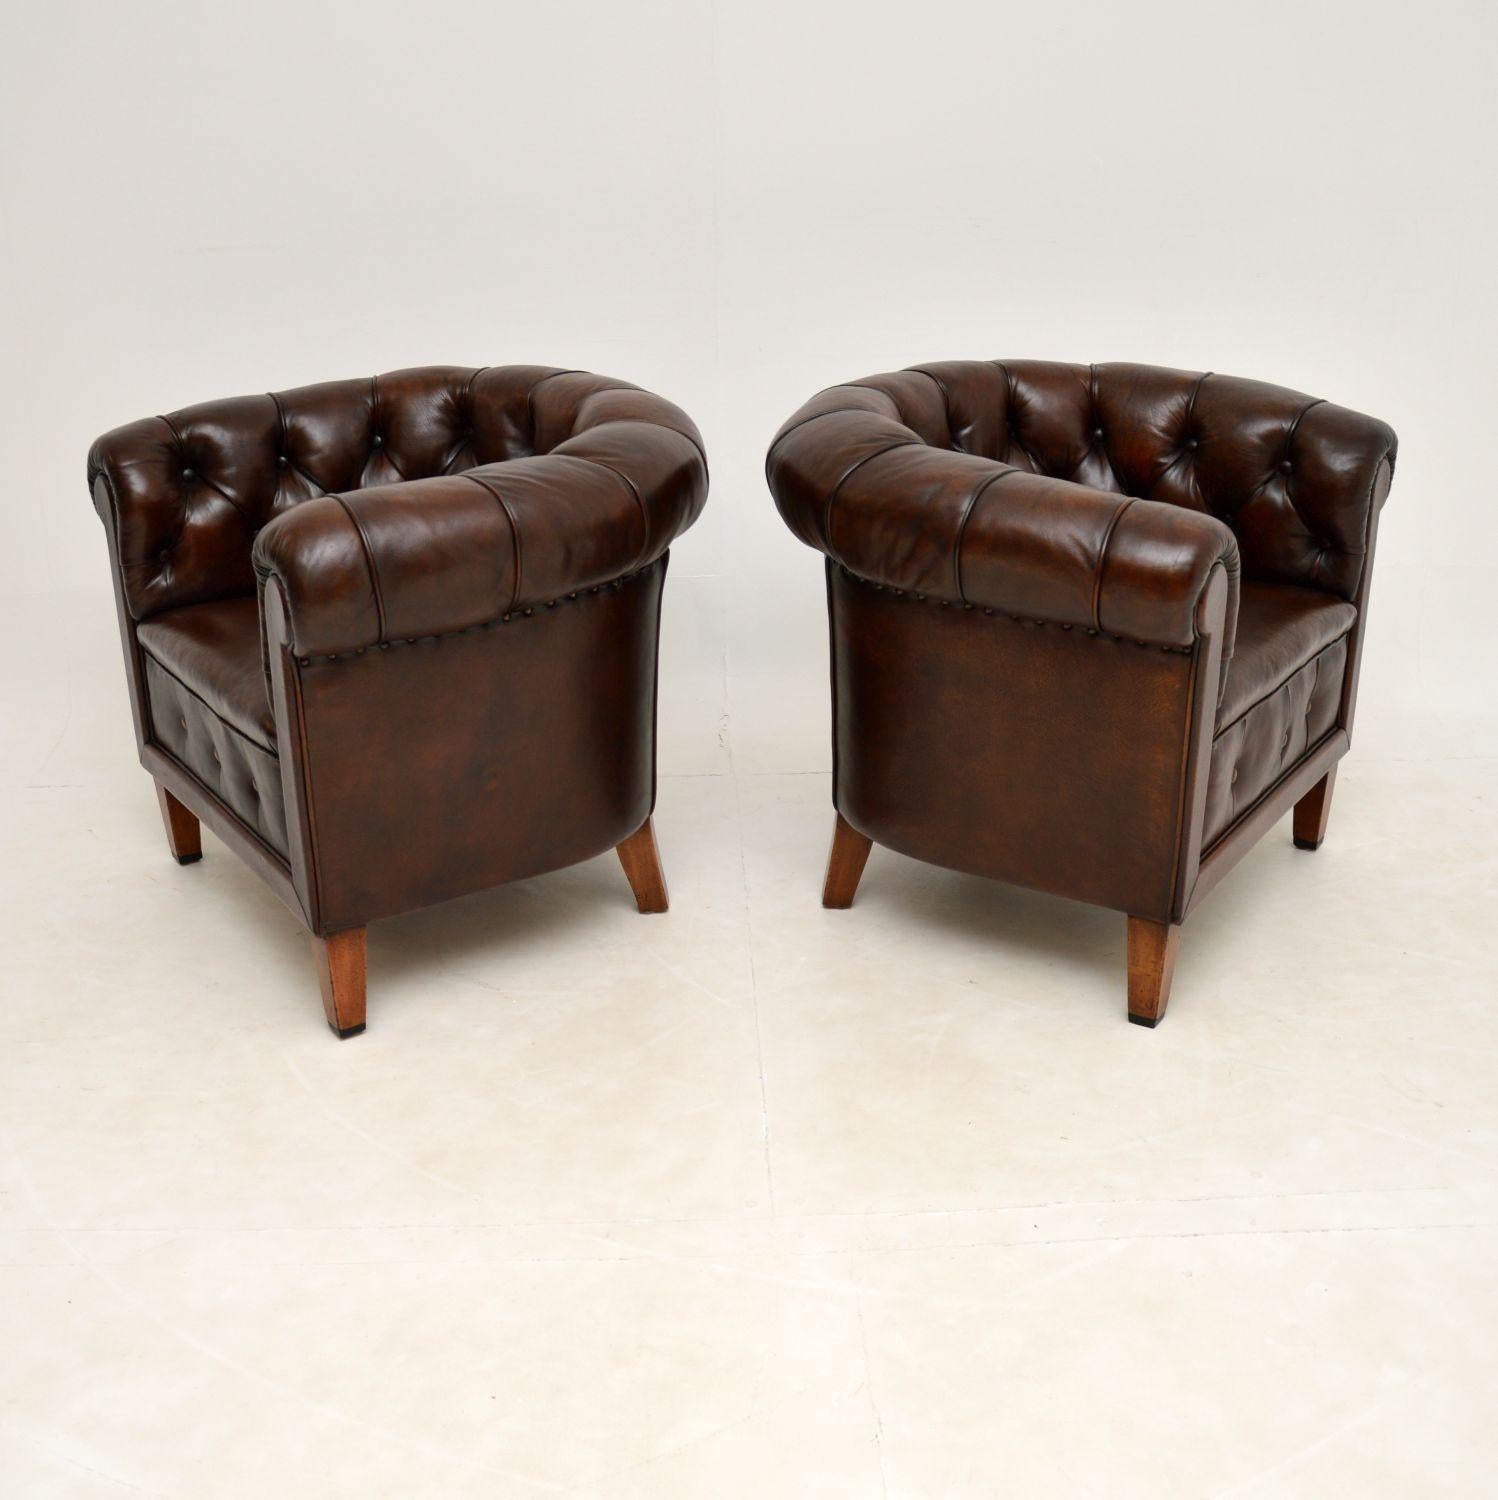 Pair of Antique Swedish Leather Chesterfield Armchairs 2